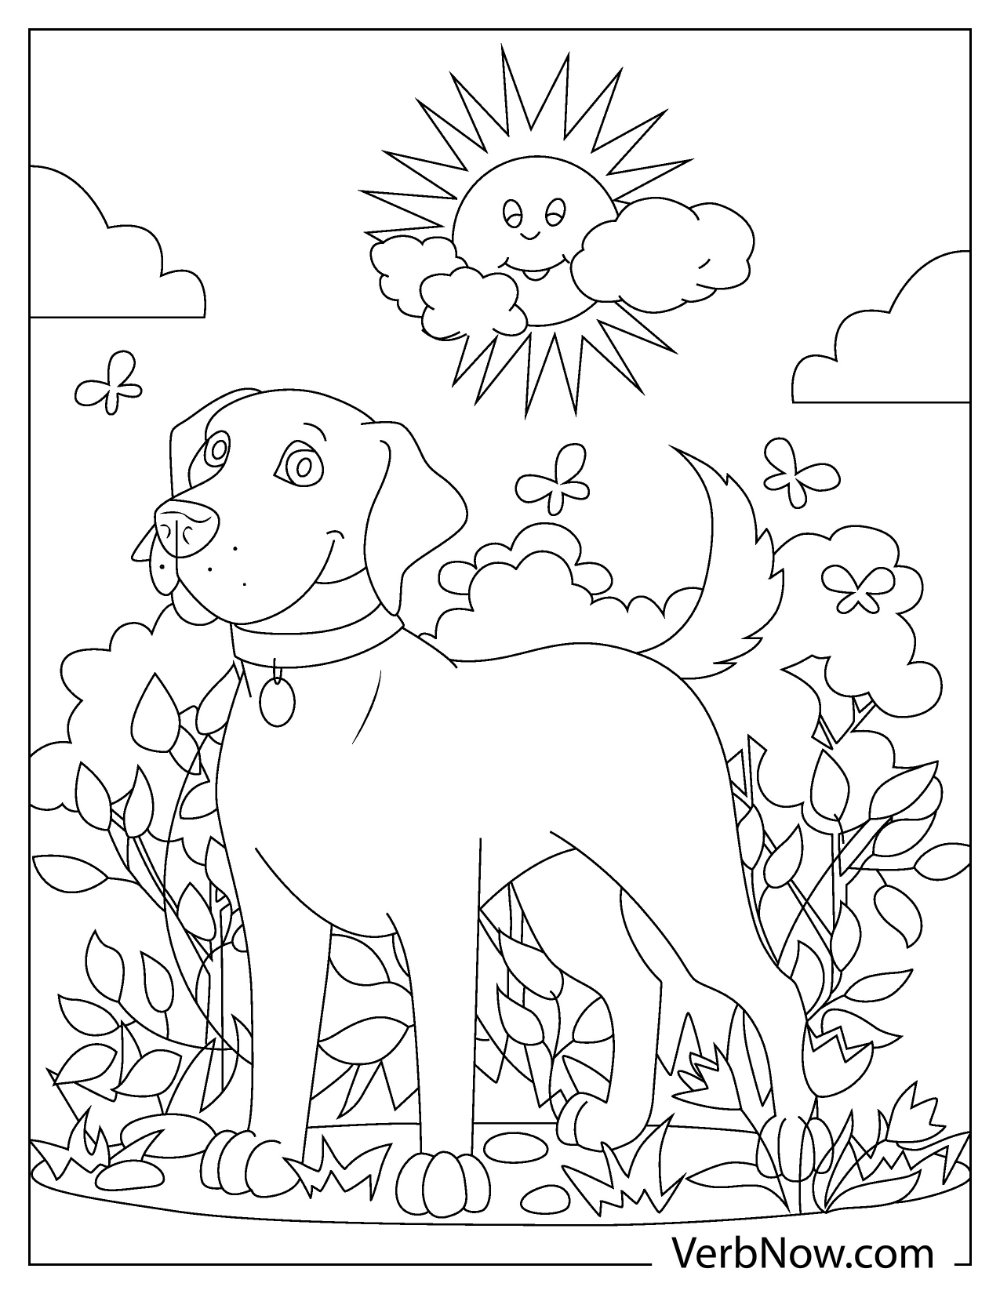 Free LABRADOR DOG Coloring Pages & Book for Download (Printable PDF) -  VerbNow